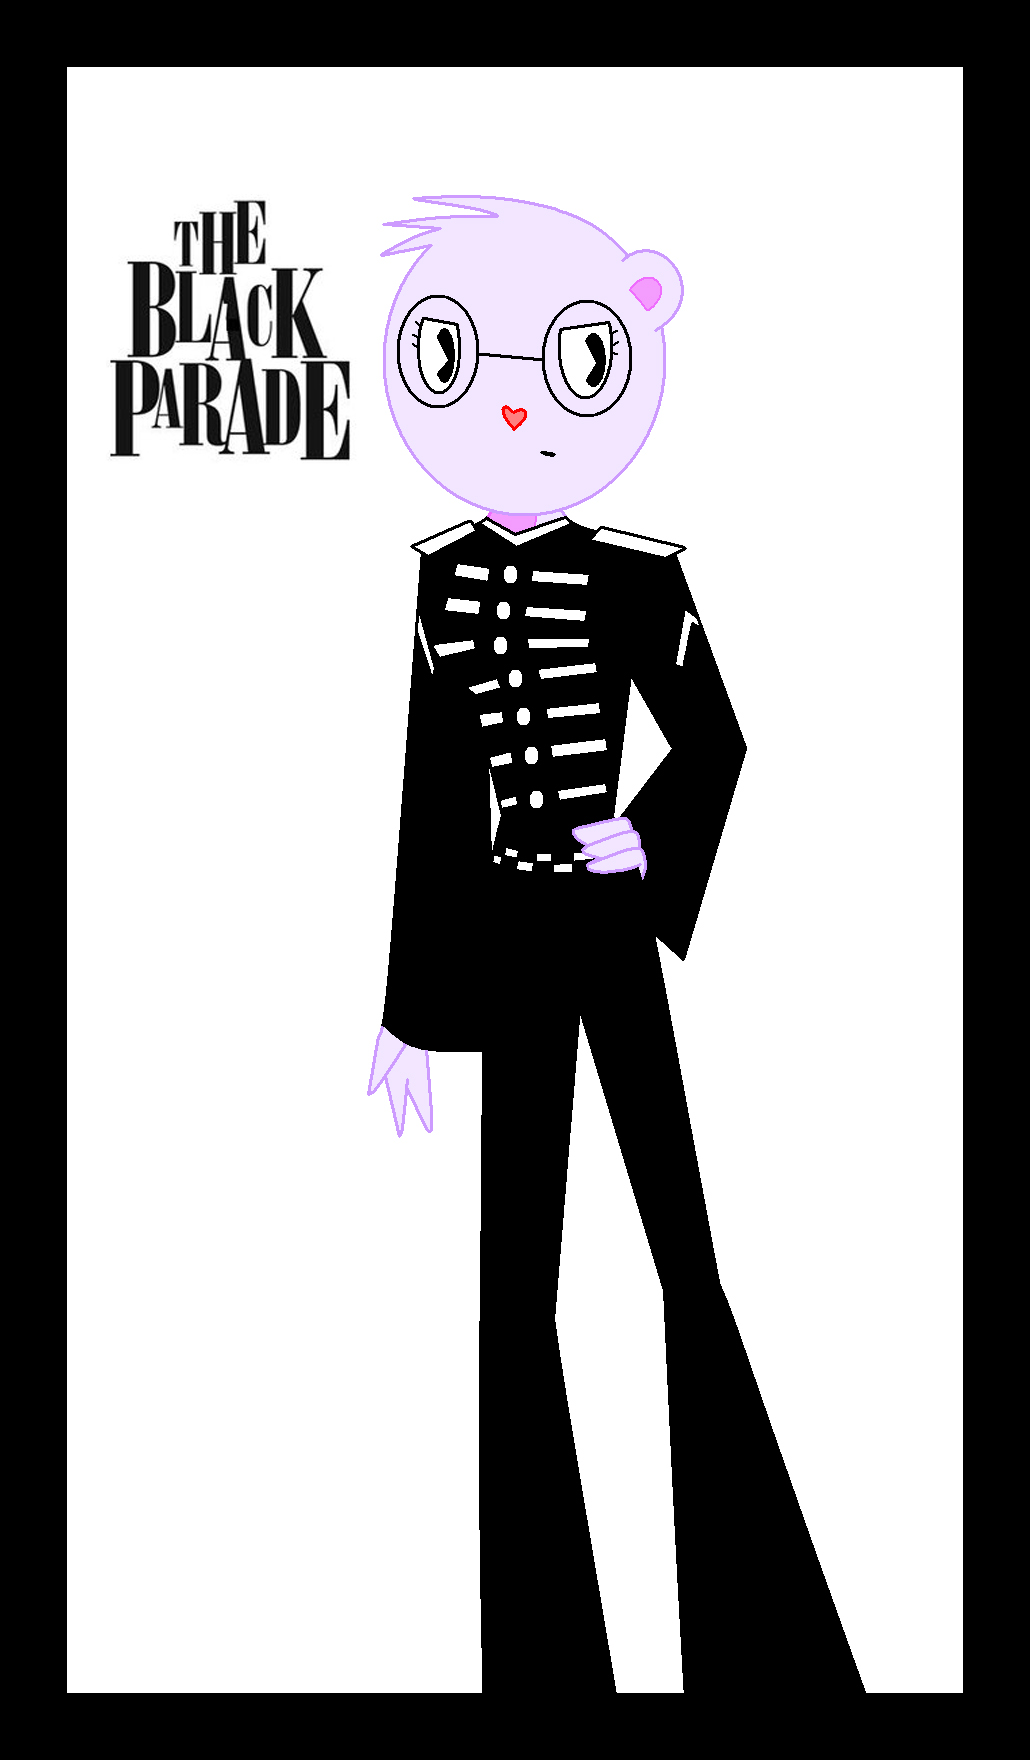 Join to the Black Parade by GavImp